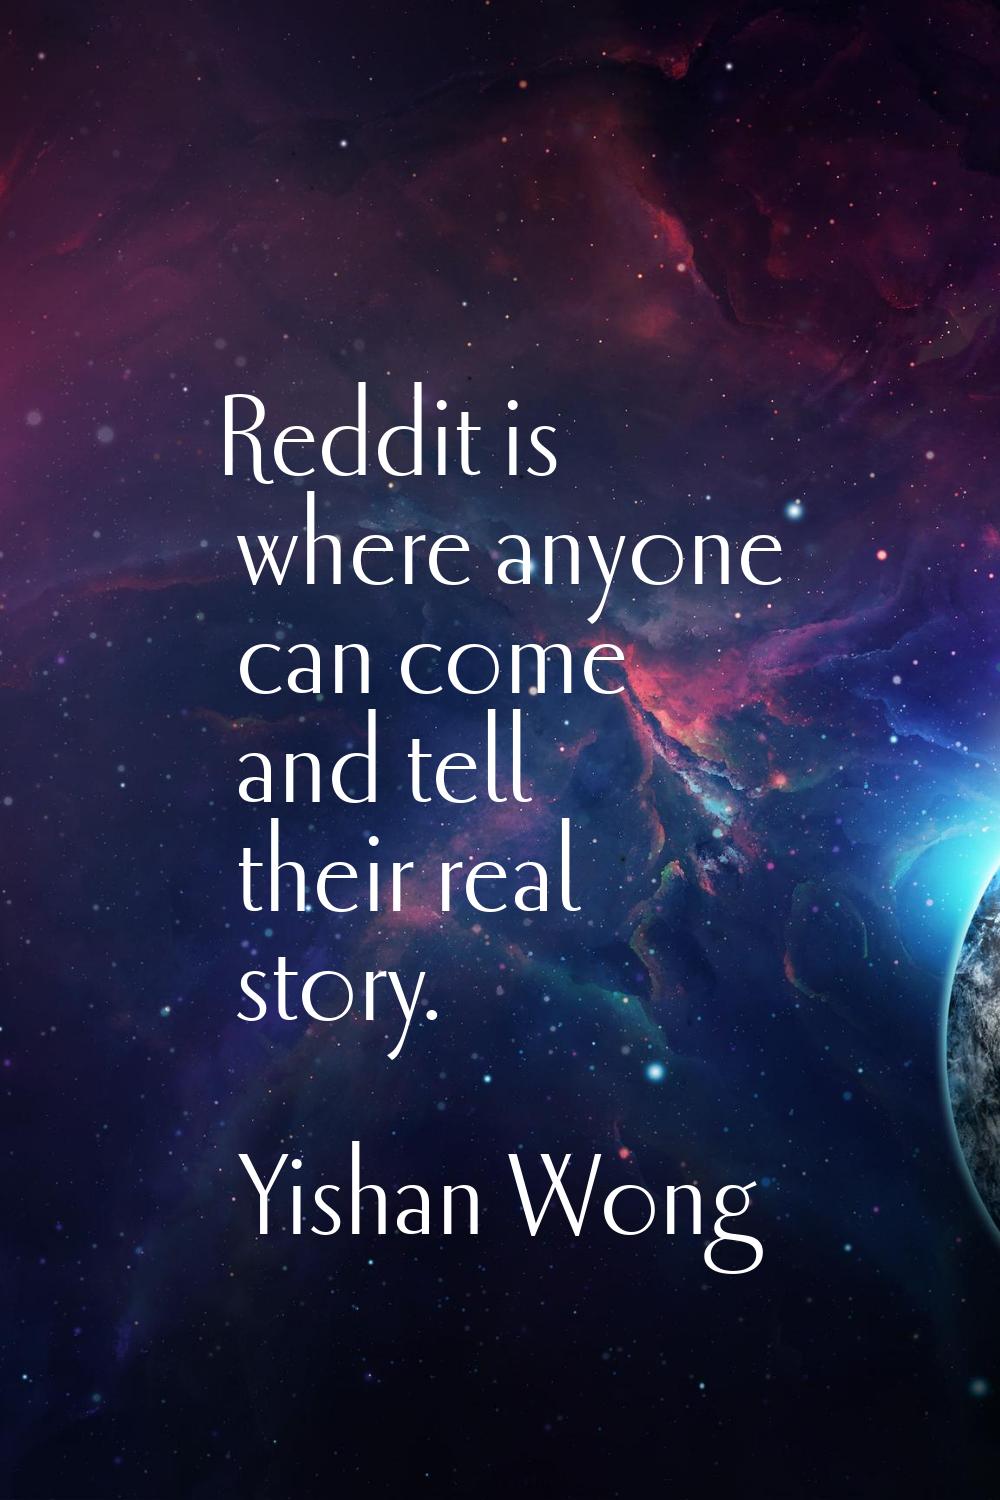 Reddit is where anyone can come and tell their real story.